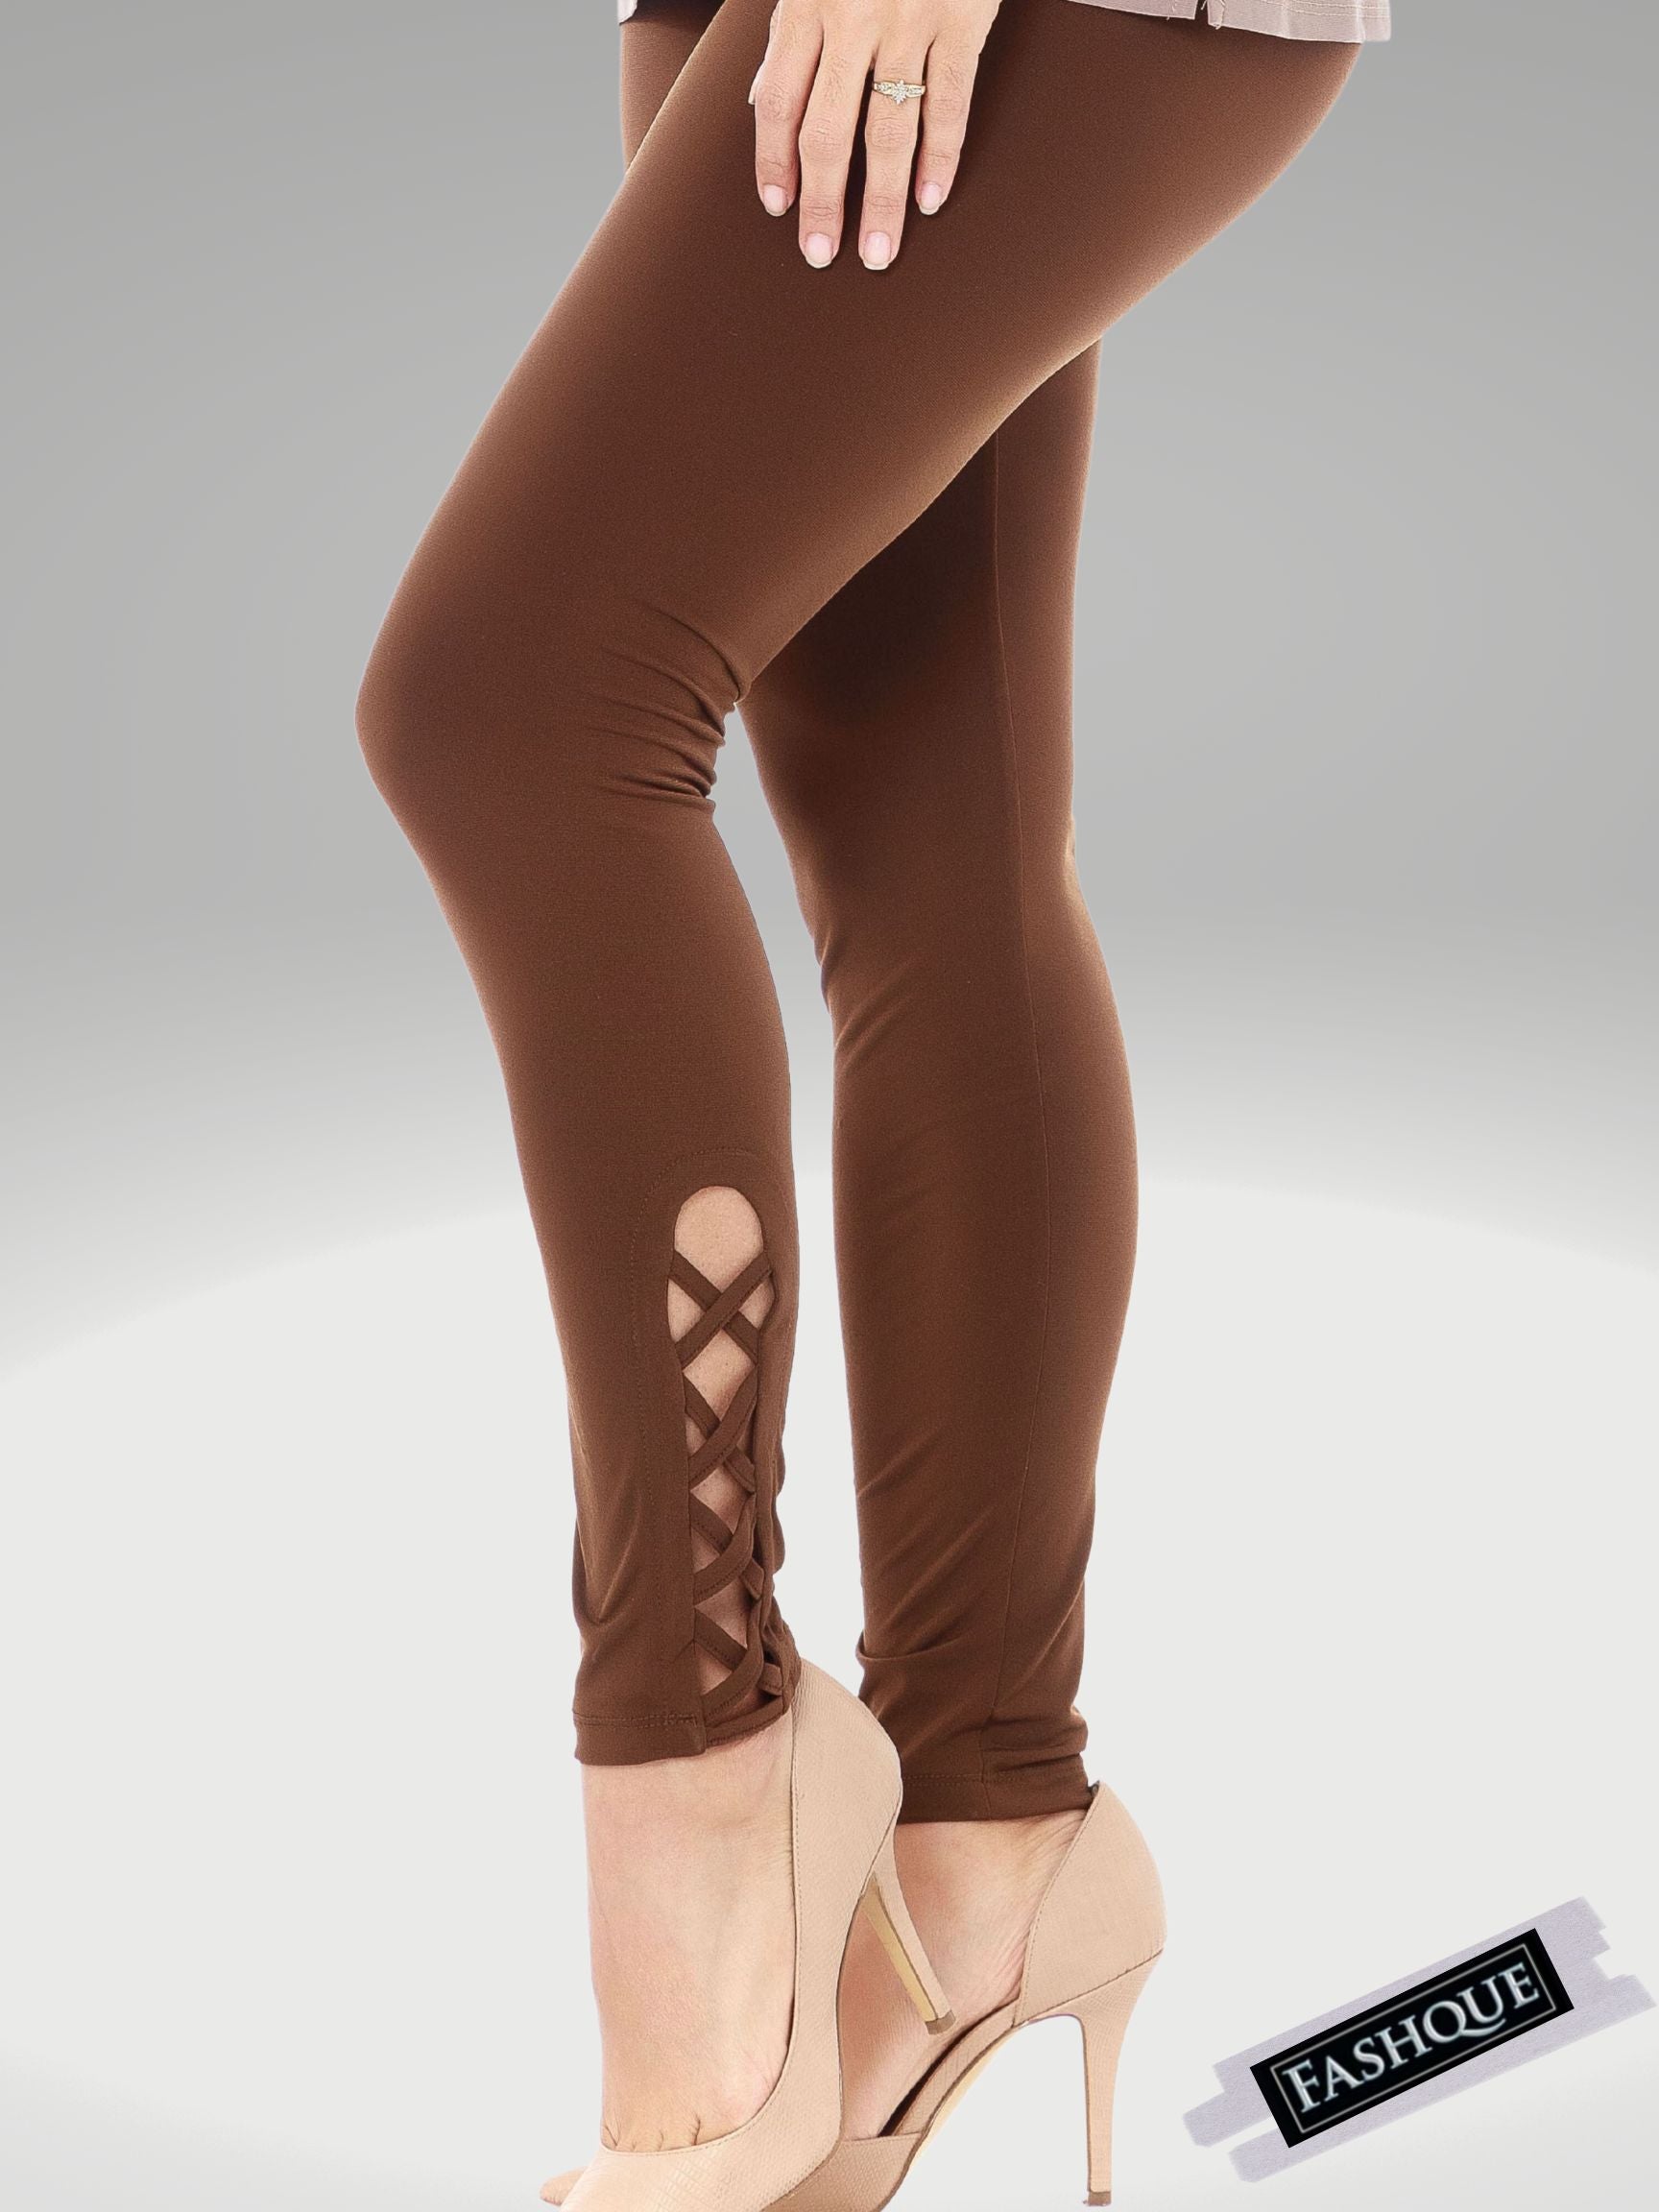 New Trend Alert: Lace Up Your Heels Over Your Leggings – Muehleder